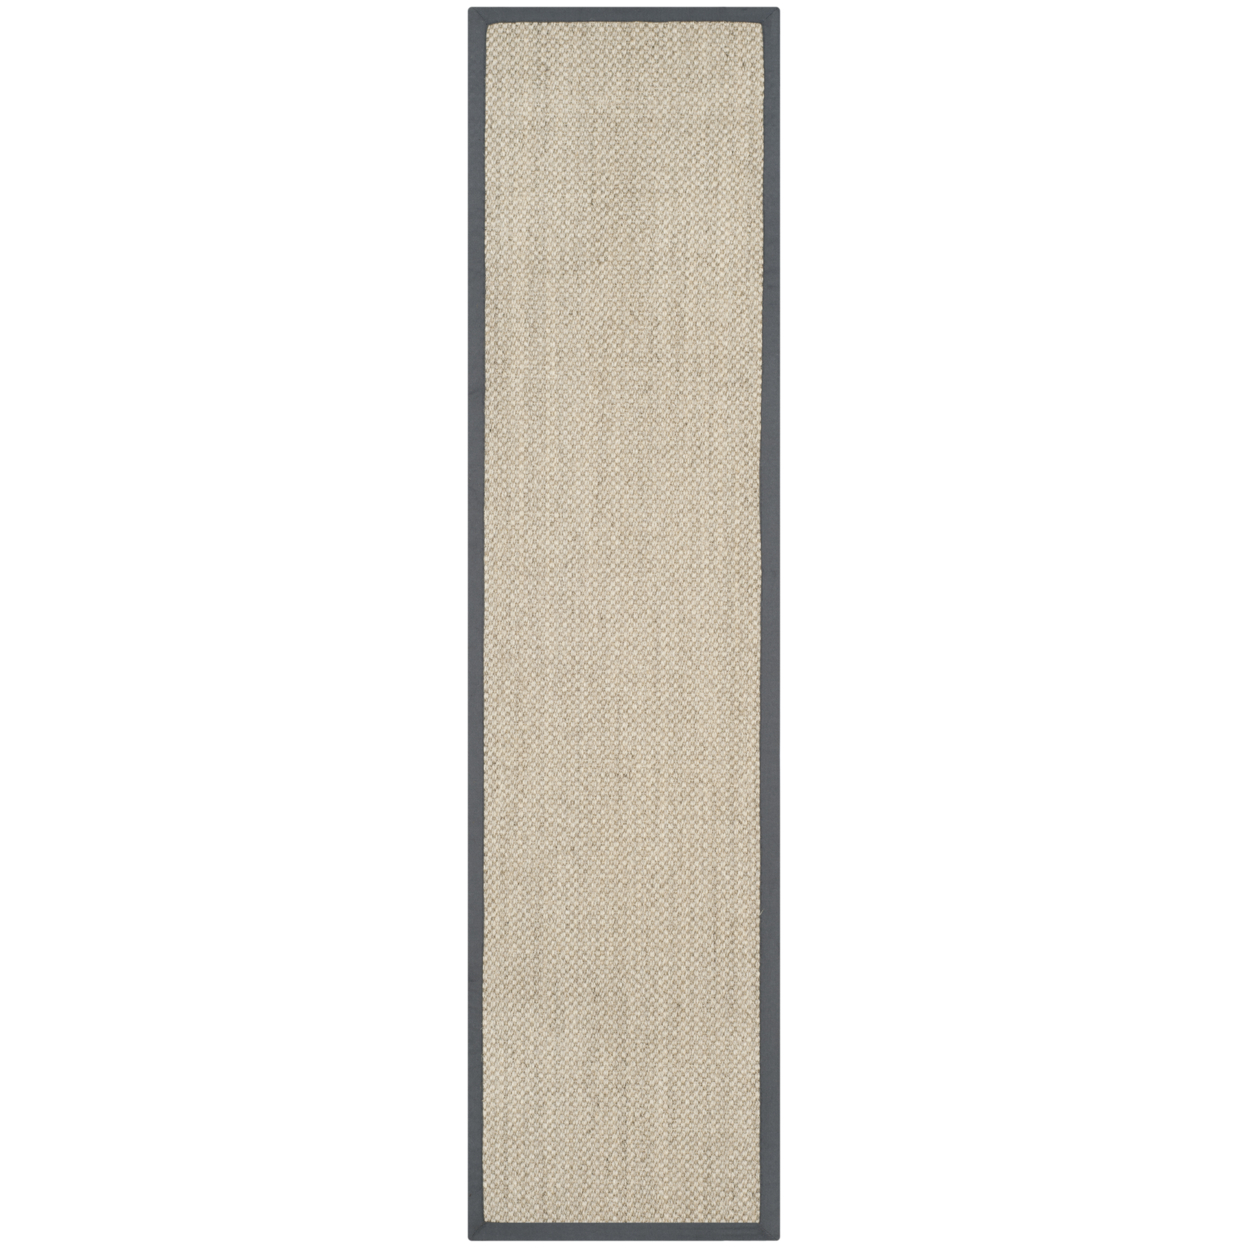 SAFAVIEH Natural Fiber Collection NF443B Marble/Grey Rug - 2' X 6'